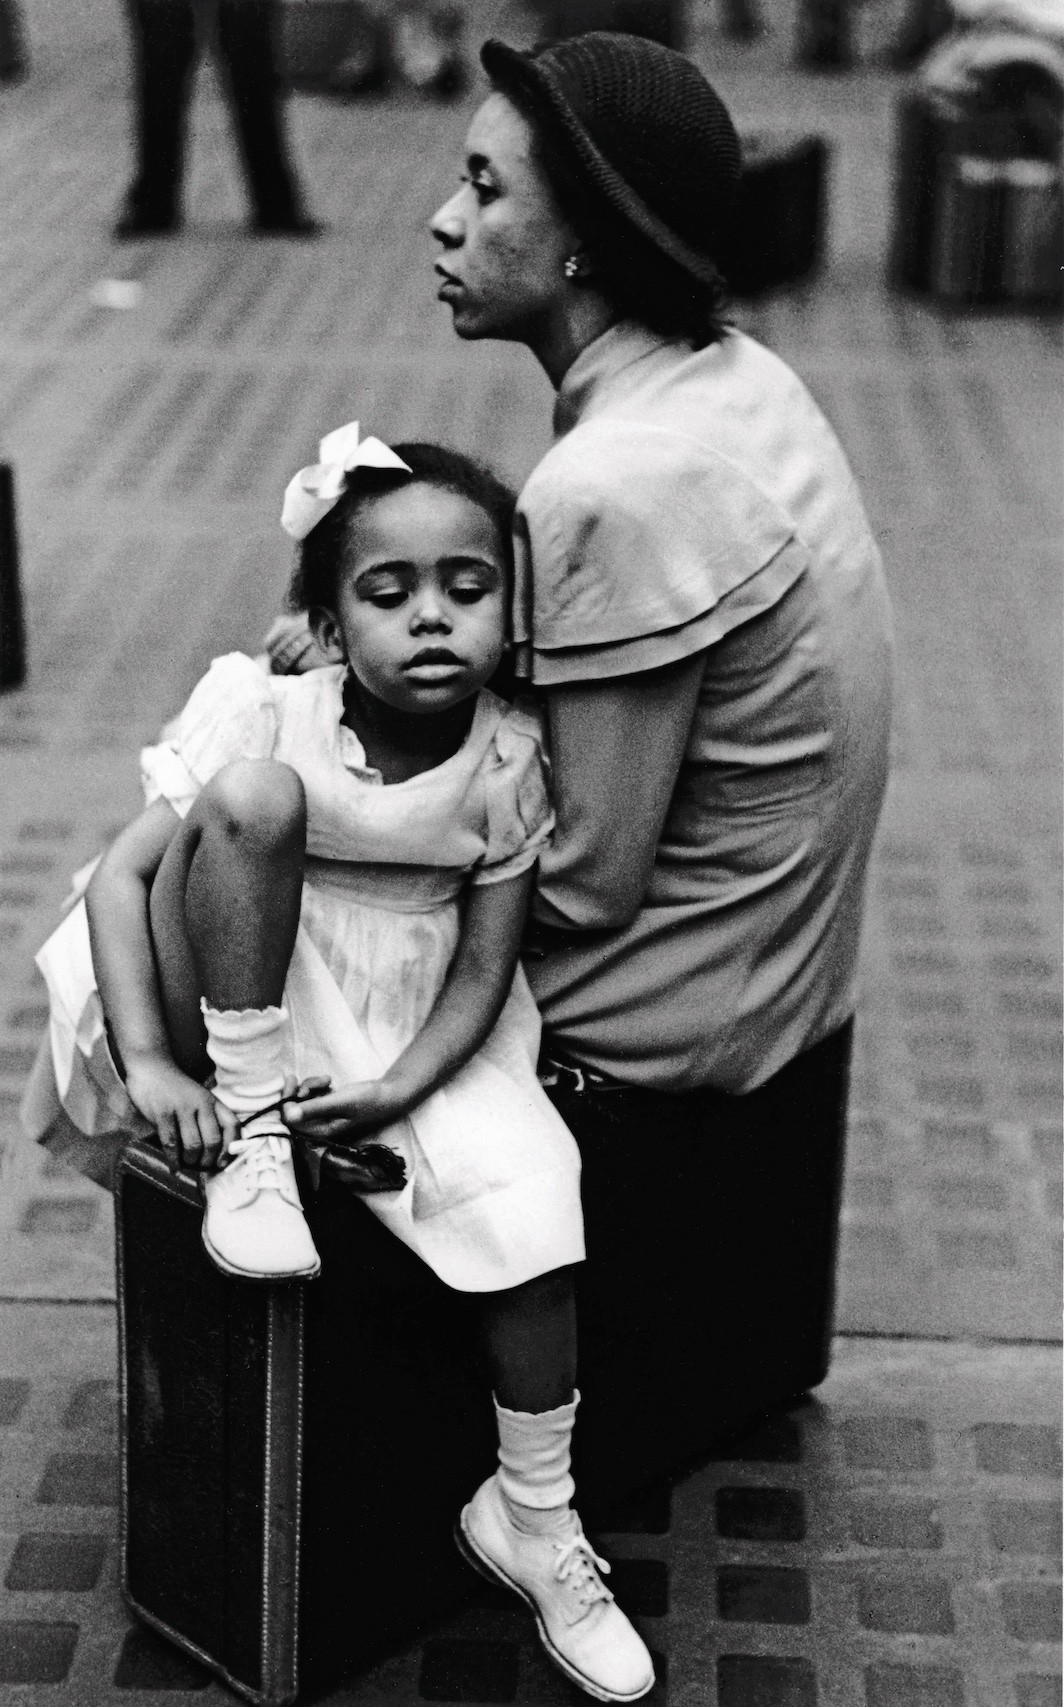 Ruth Orkin, Mother and Daughter on Suitcase, Penn Station, New York City, 1947, gelatin silver print, 18 7/8 × 12 7/8". © Orkin/Engel Film and Photo Archive/VG Bild-Kunst, Bonn